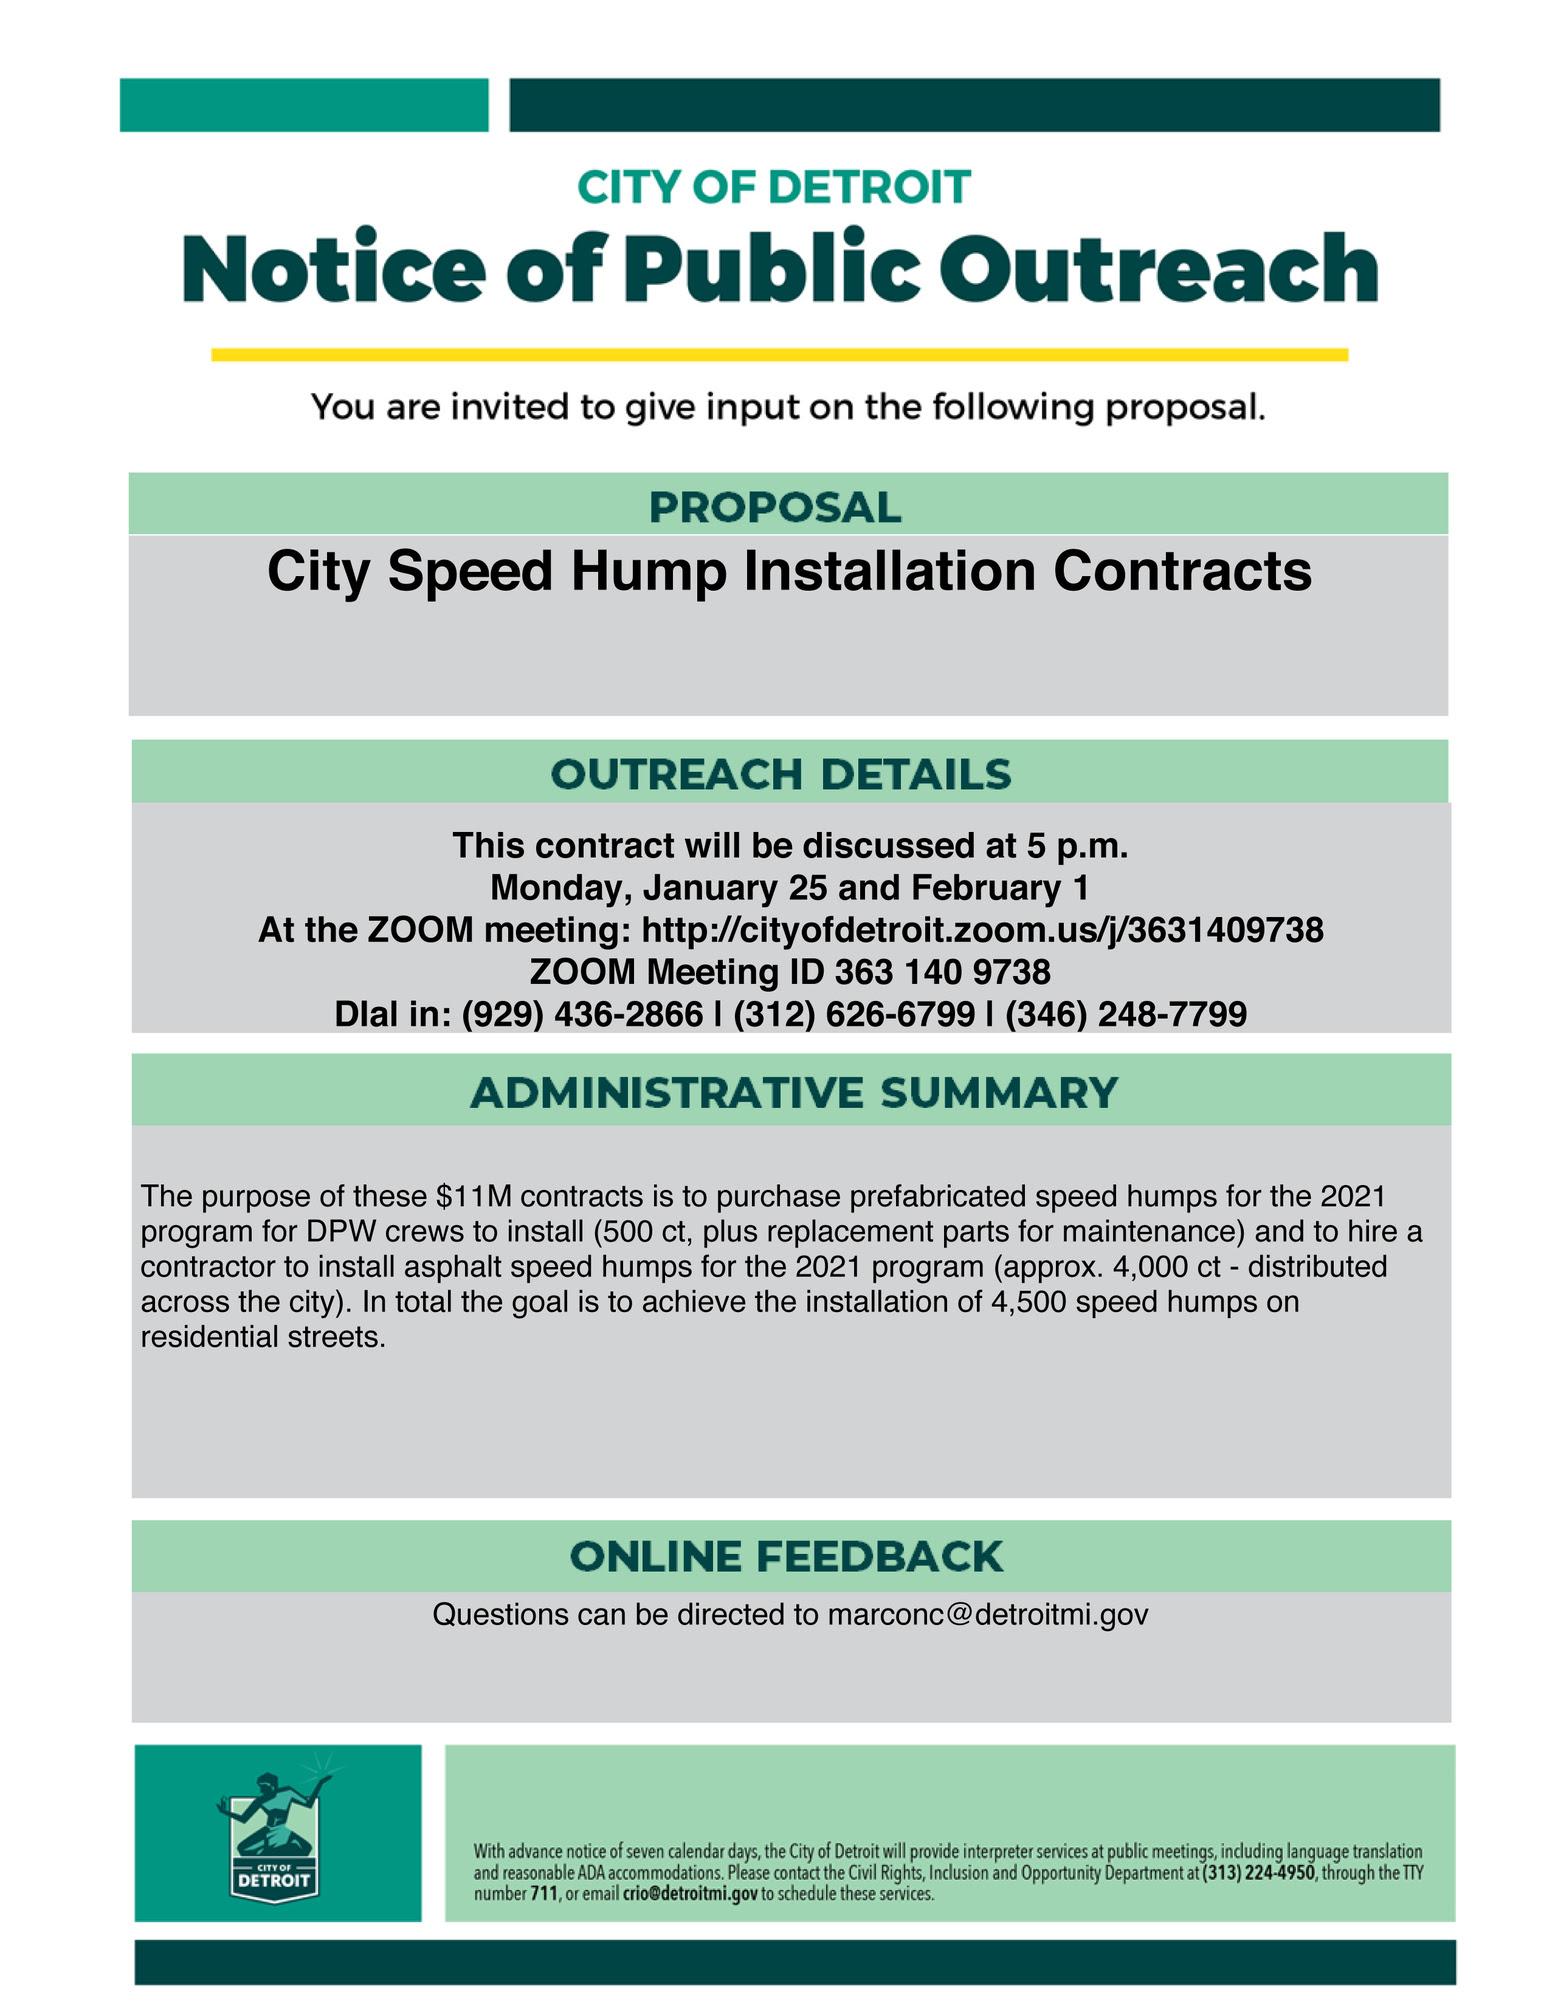 DPW Speed Humps COO Notice 1.15.21